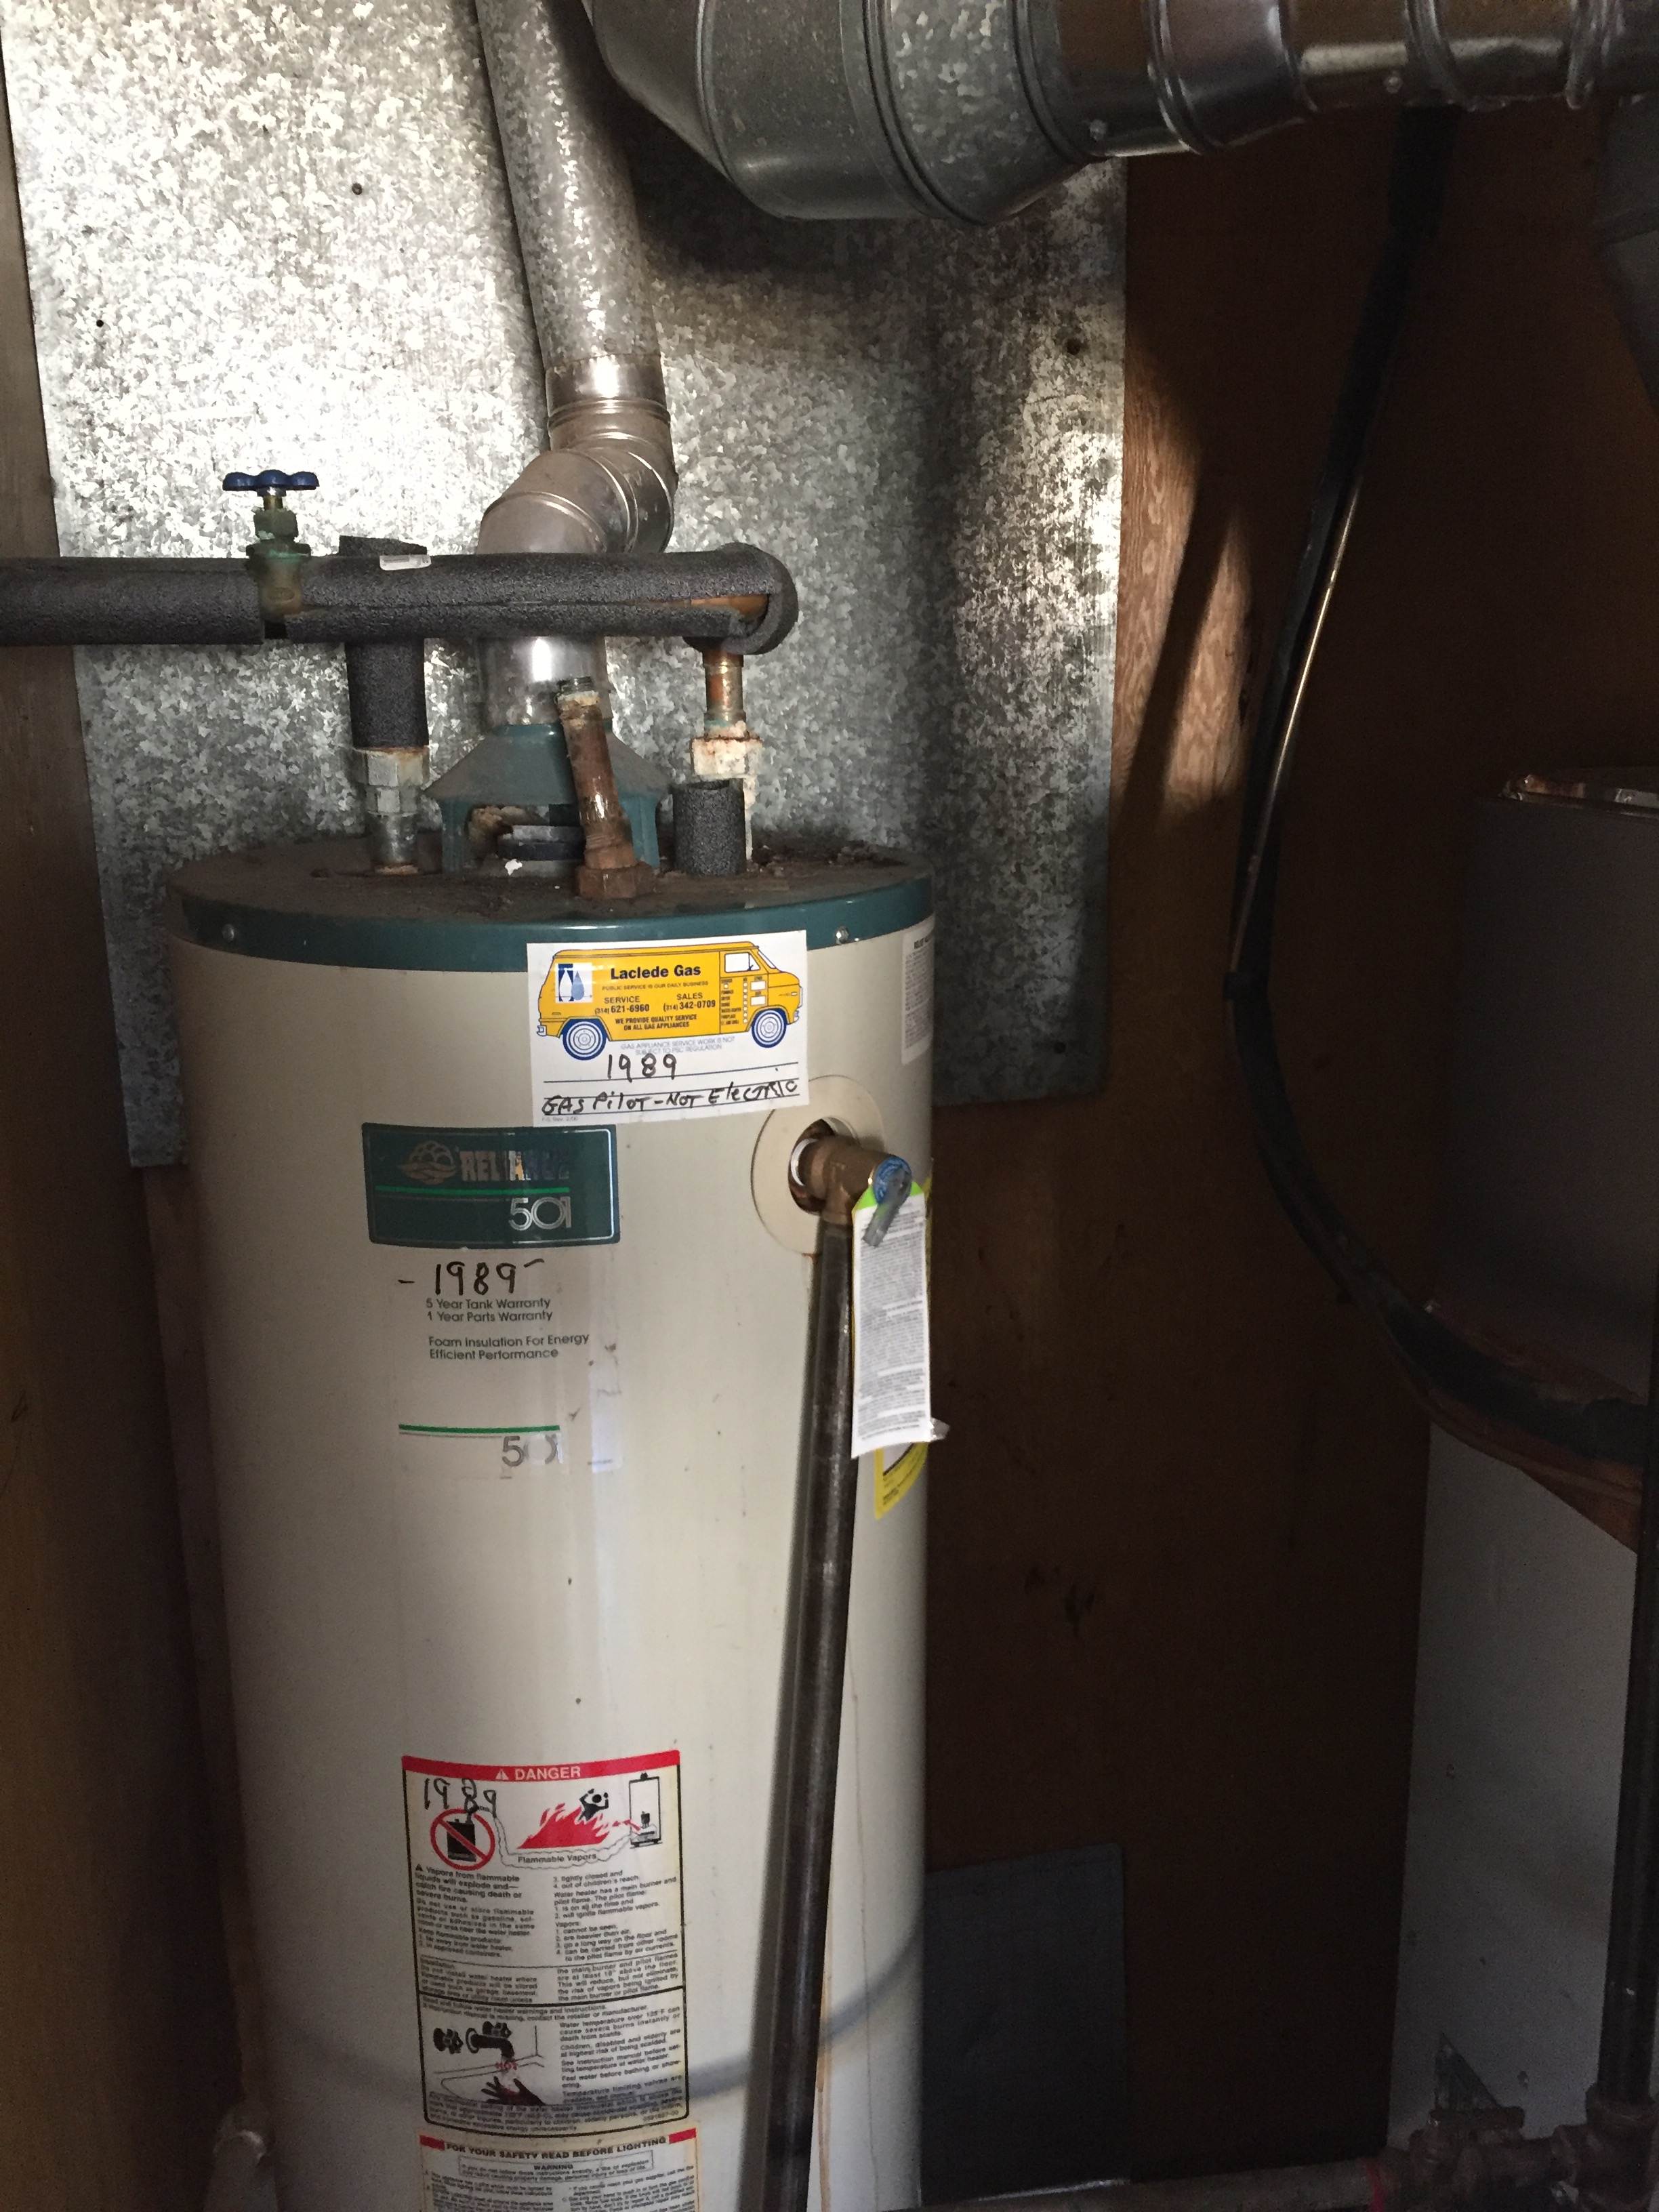 Make sure and have your water heater serviced before a leak occurs!